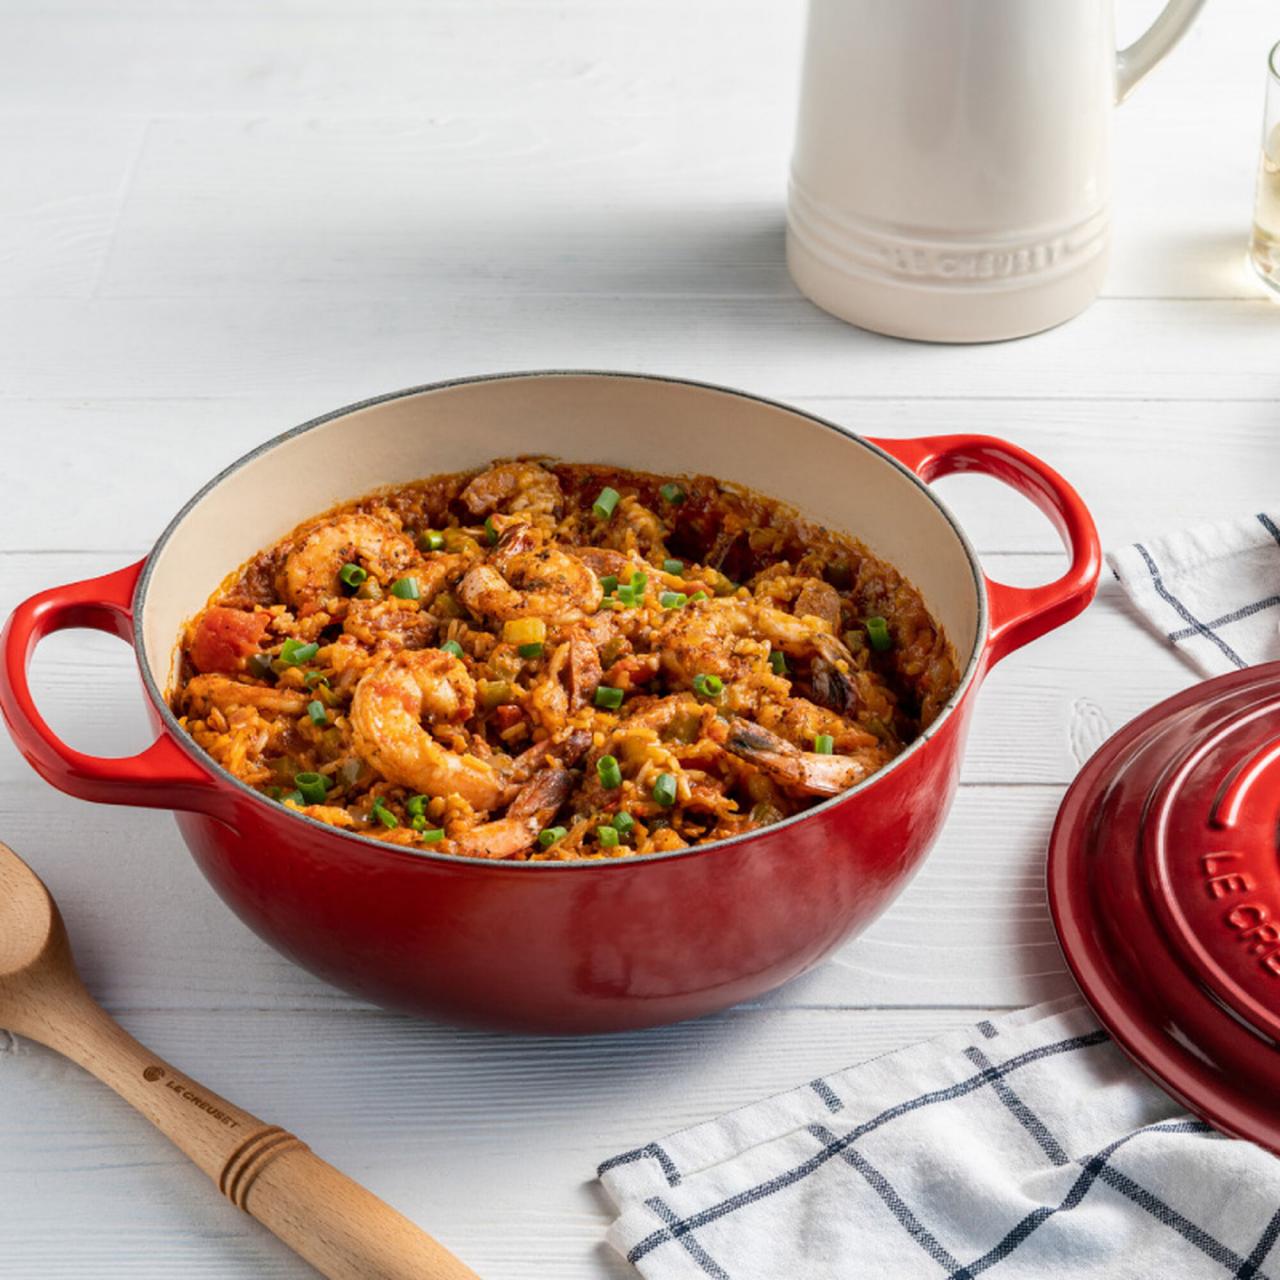 Le Creuset Launches Limited-Edition Rainbow Dutch Oven, FN Dish -  Behind-the-Scenes, Food Trends, and Best Recipes : Food Network